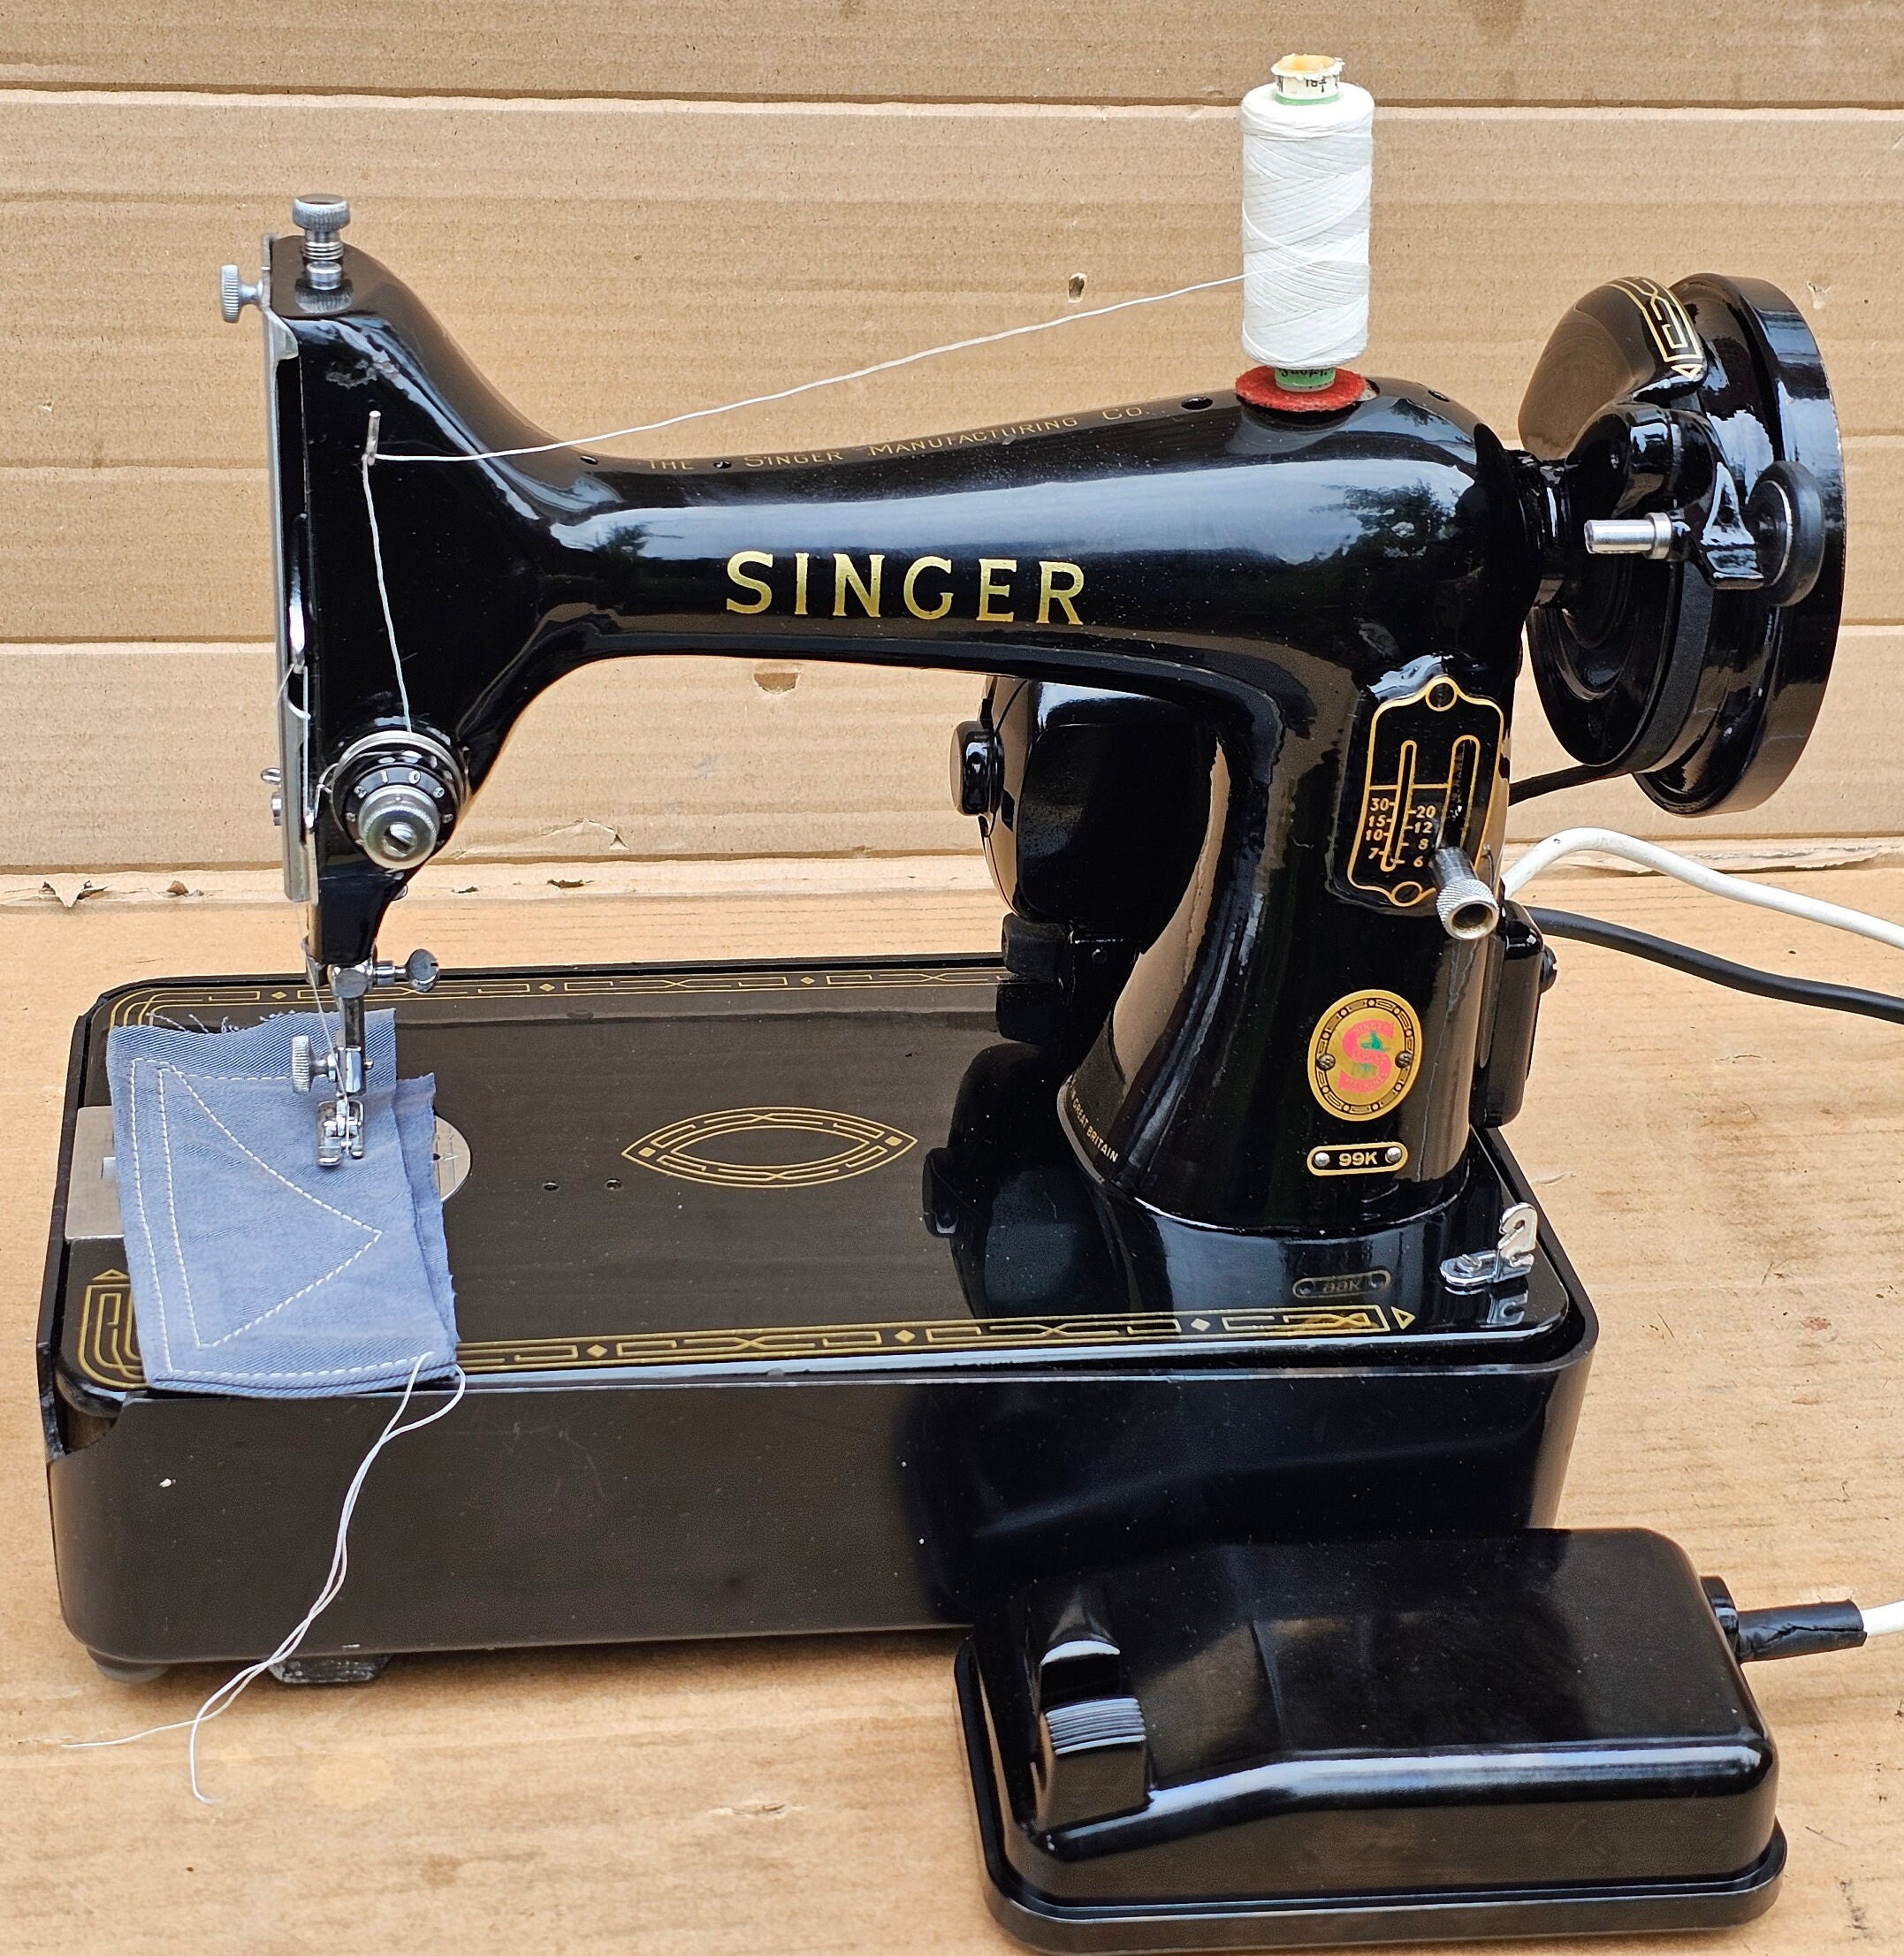 Singer Adjustable Zipper Foot 121877 Low Shank Side Clamp Attachment for  Model 15, 66, 99, 128, 201, and 221 Featherweight Sewing Machines 